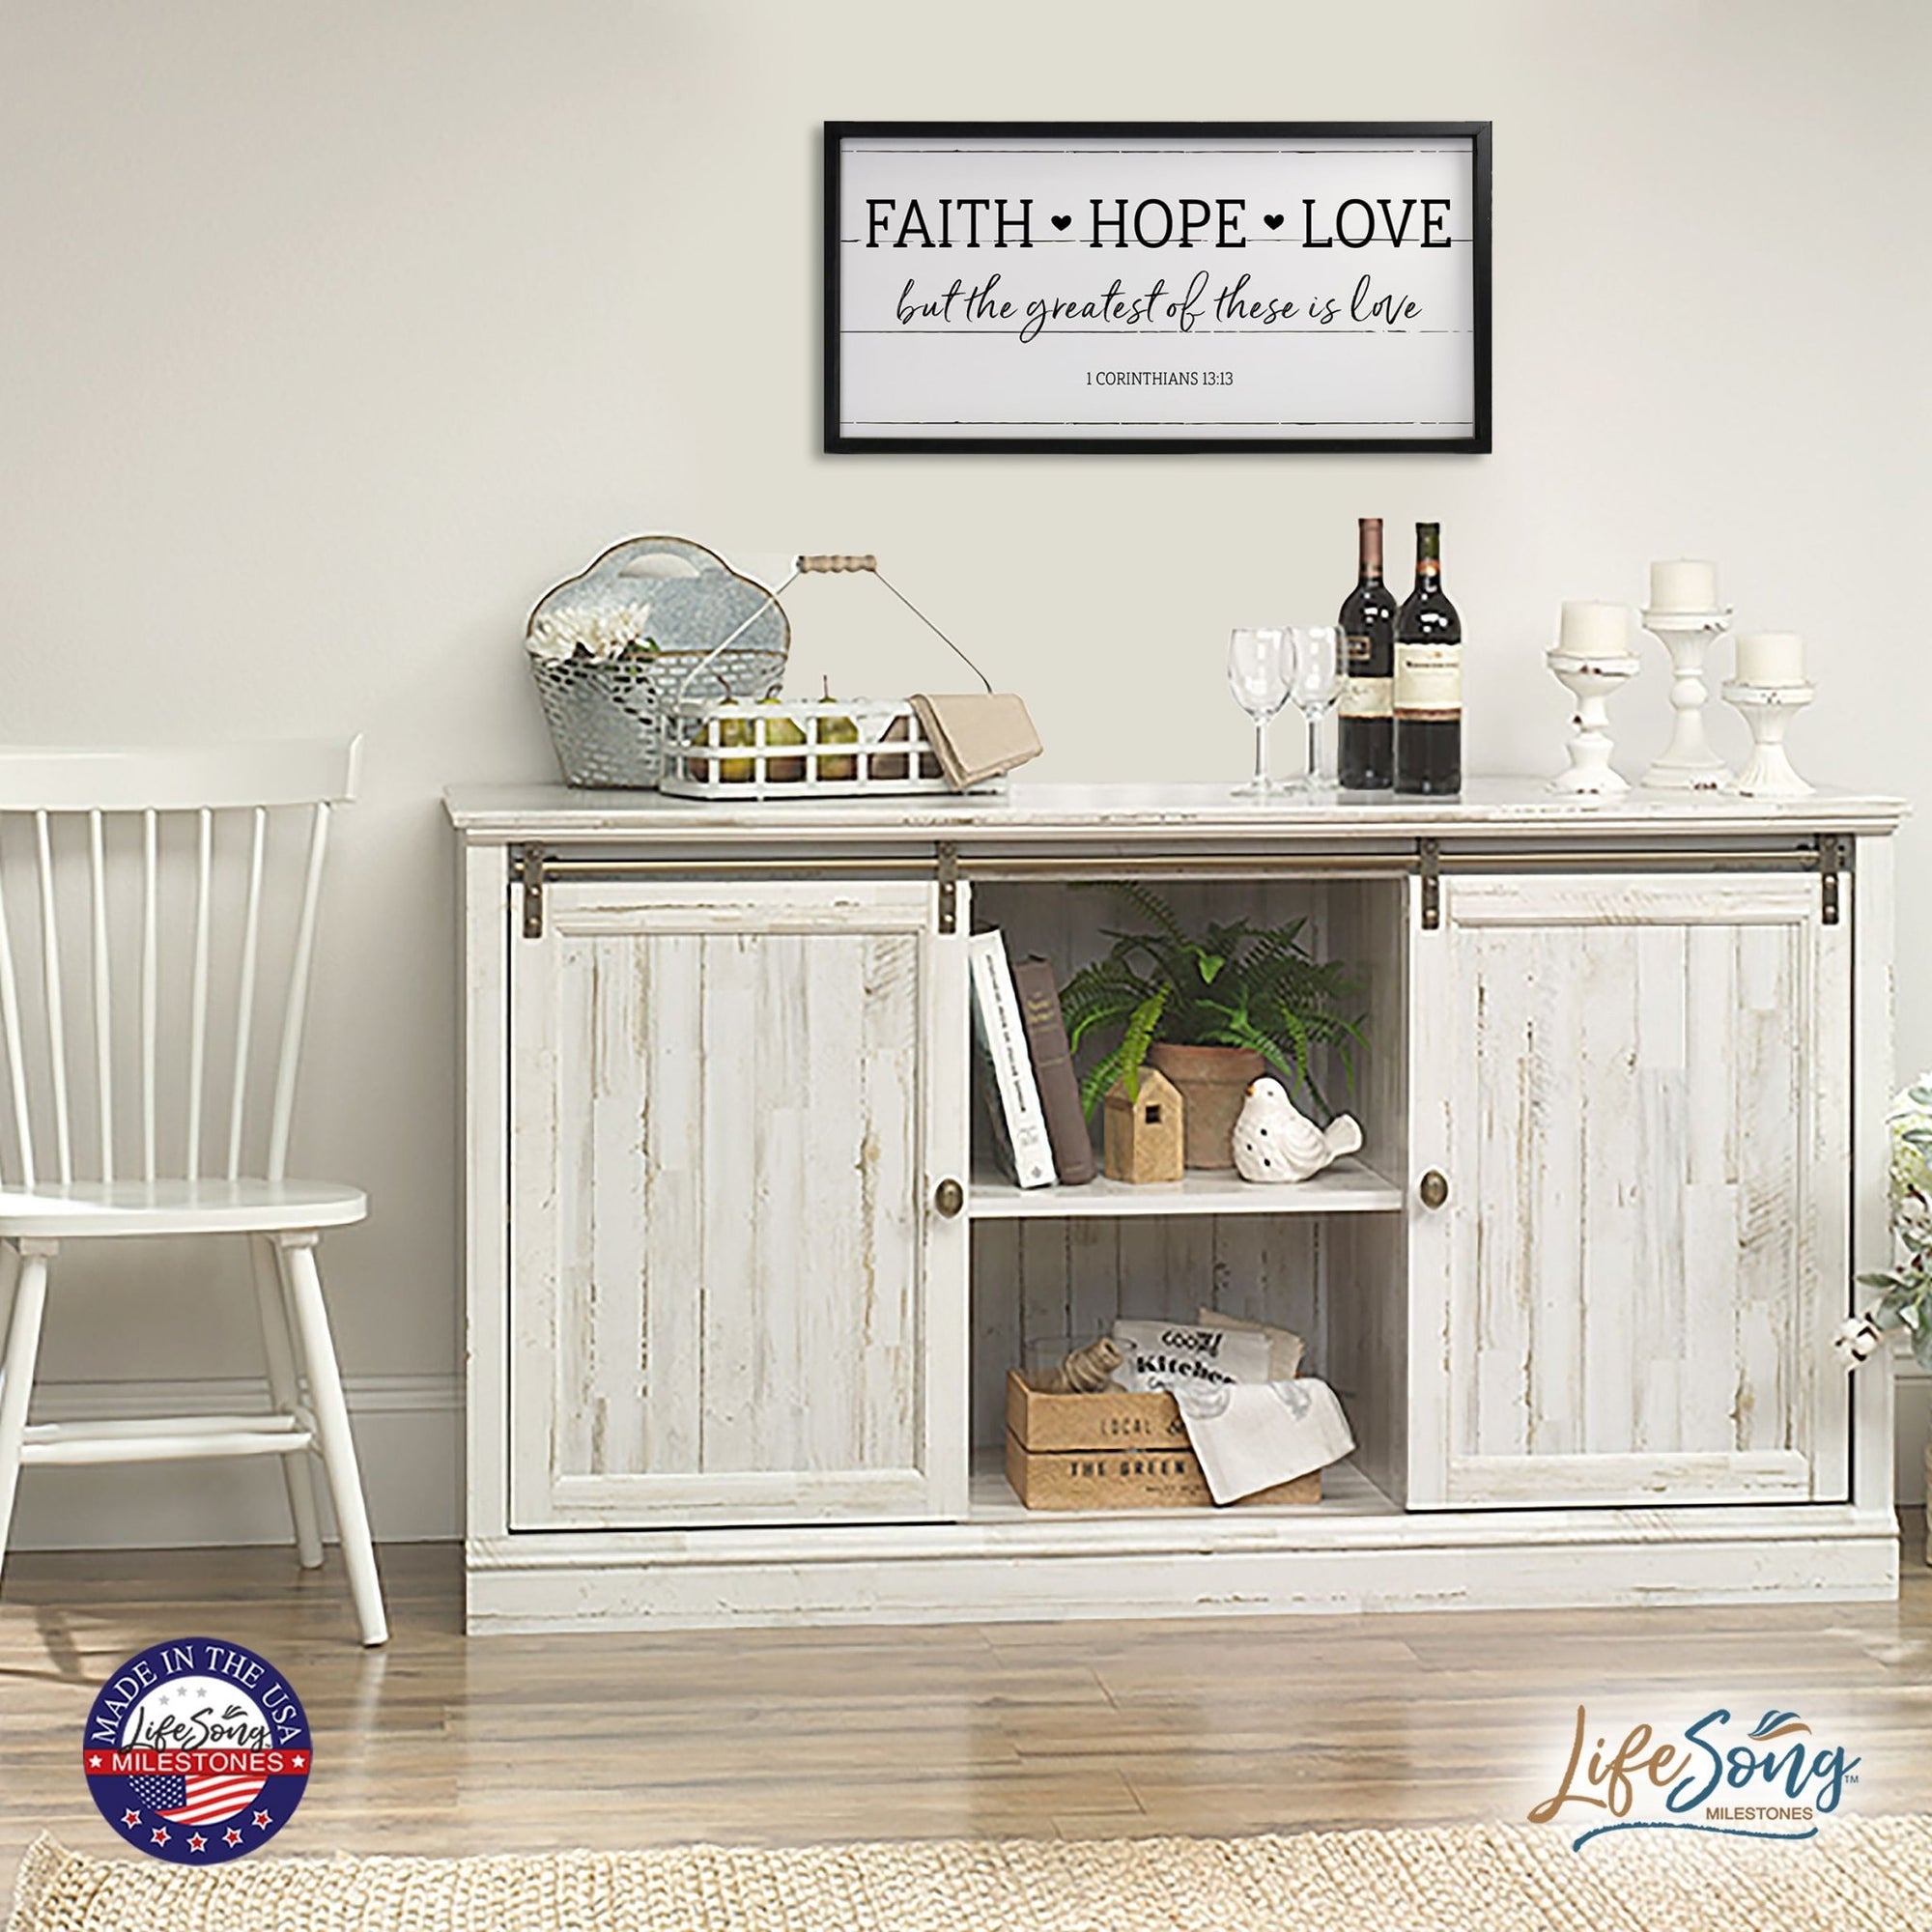 Large Family Wall Décor Quote Sign For Home Decoration 18 x 36 - Faith Hope Love - LifeSong Milestones